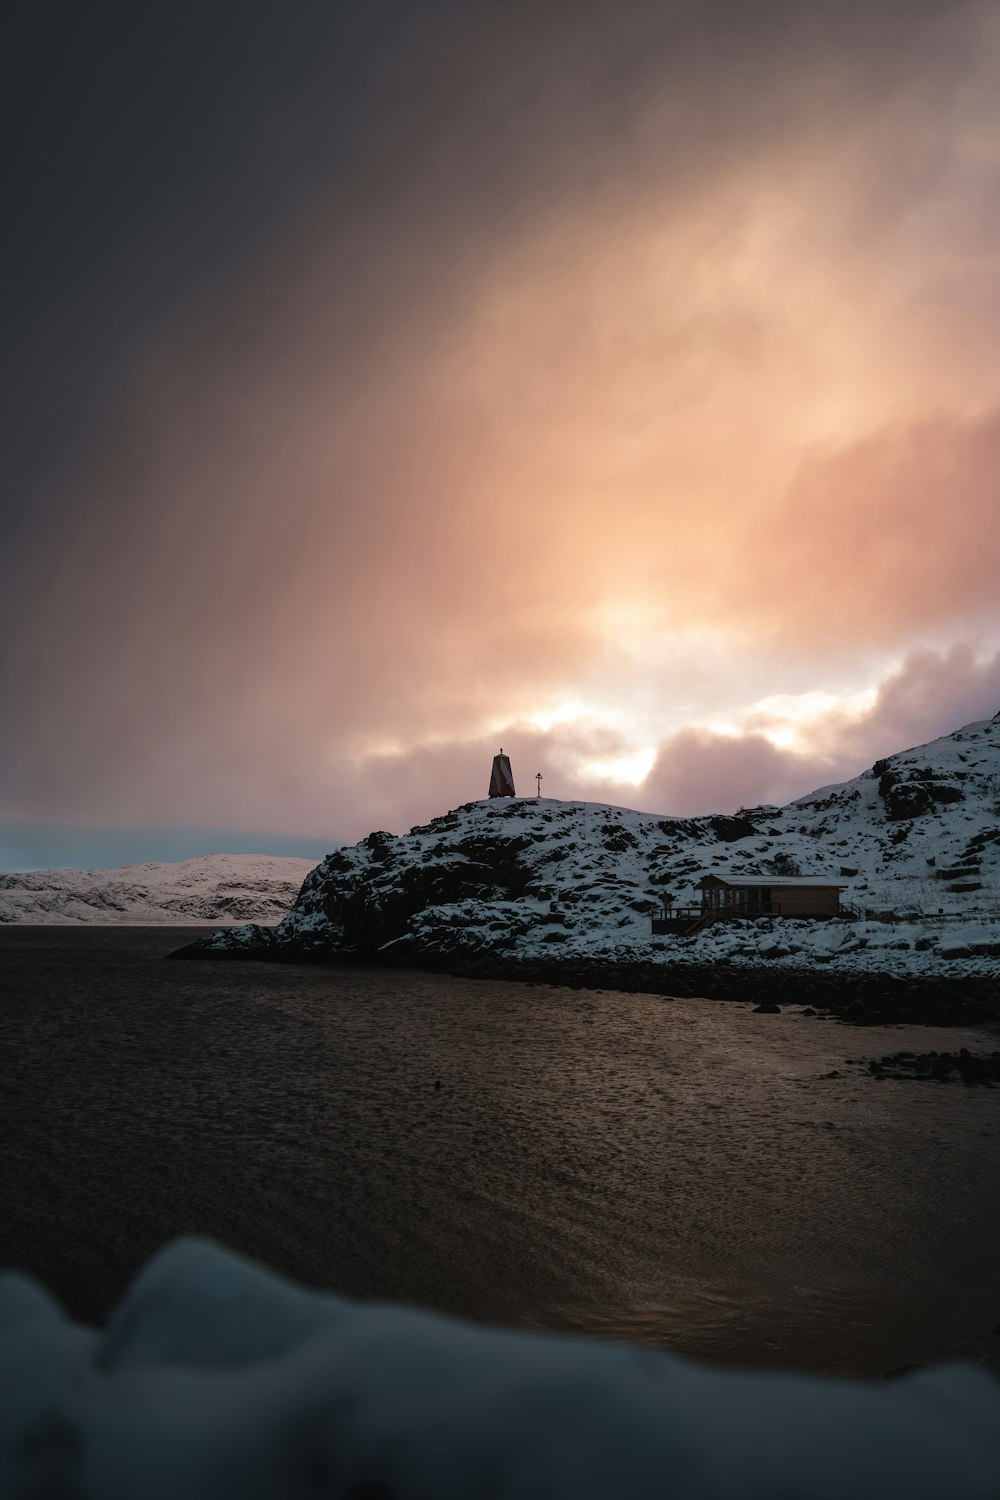 a lighthouse on top of a snowy hill under a cloudy sky